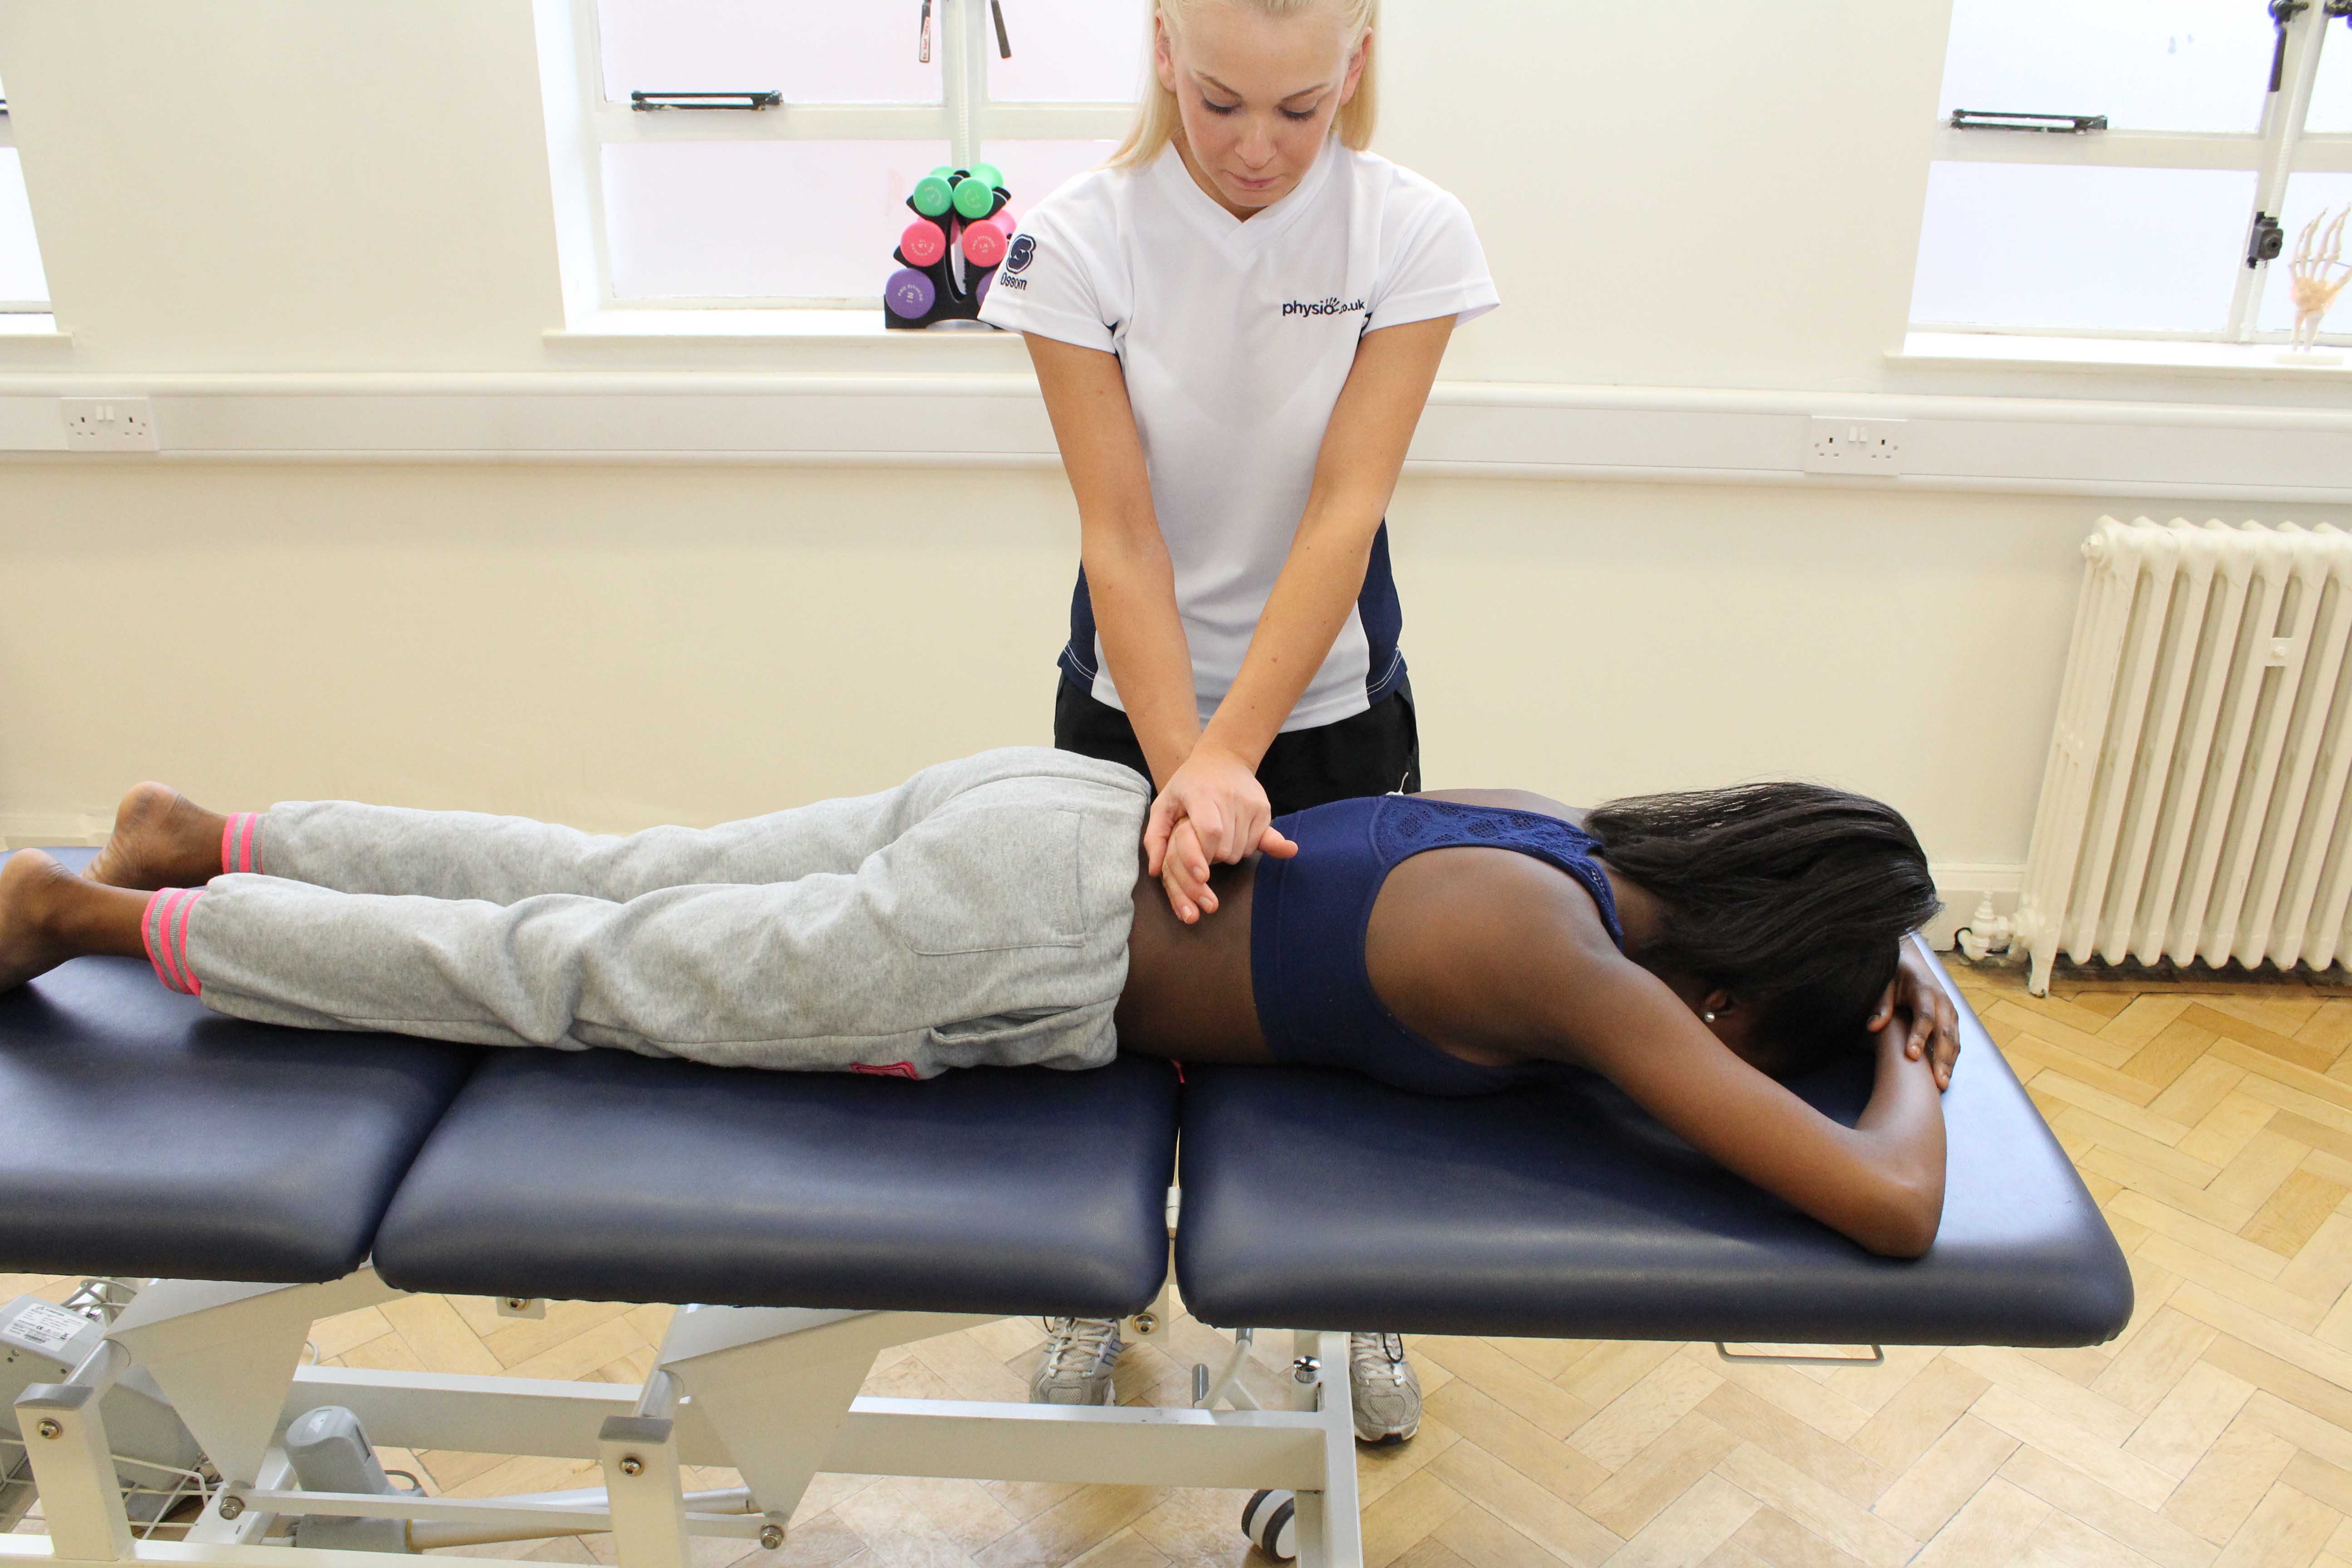 Mobilisations of the lumber vertebrea by physiotherapist to relieve pain and stiffness